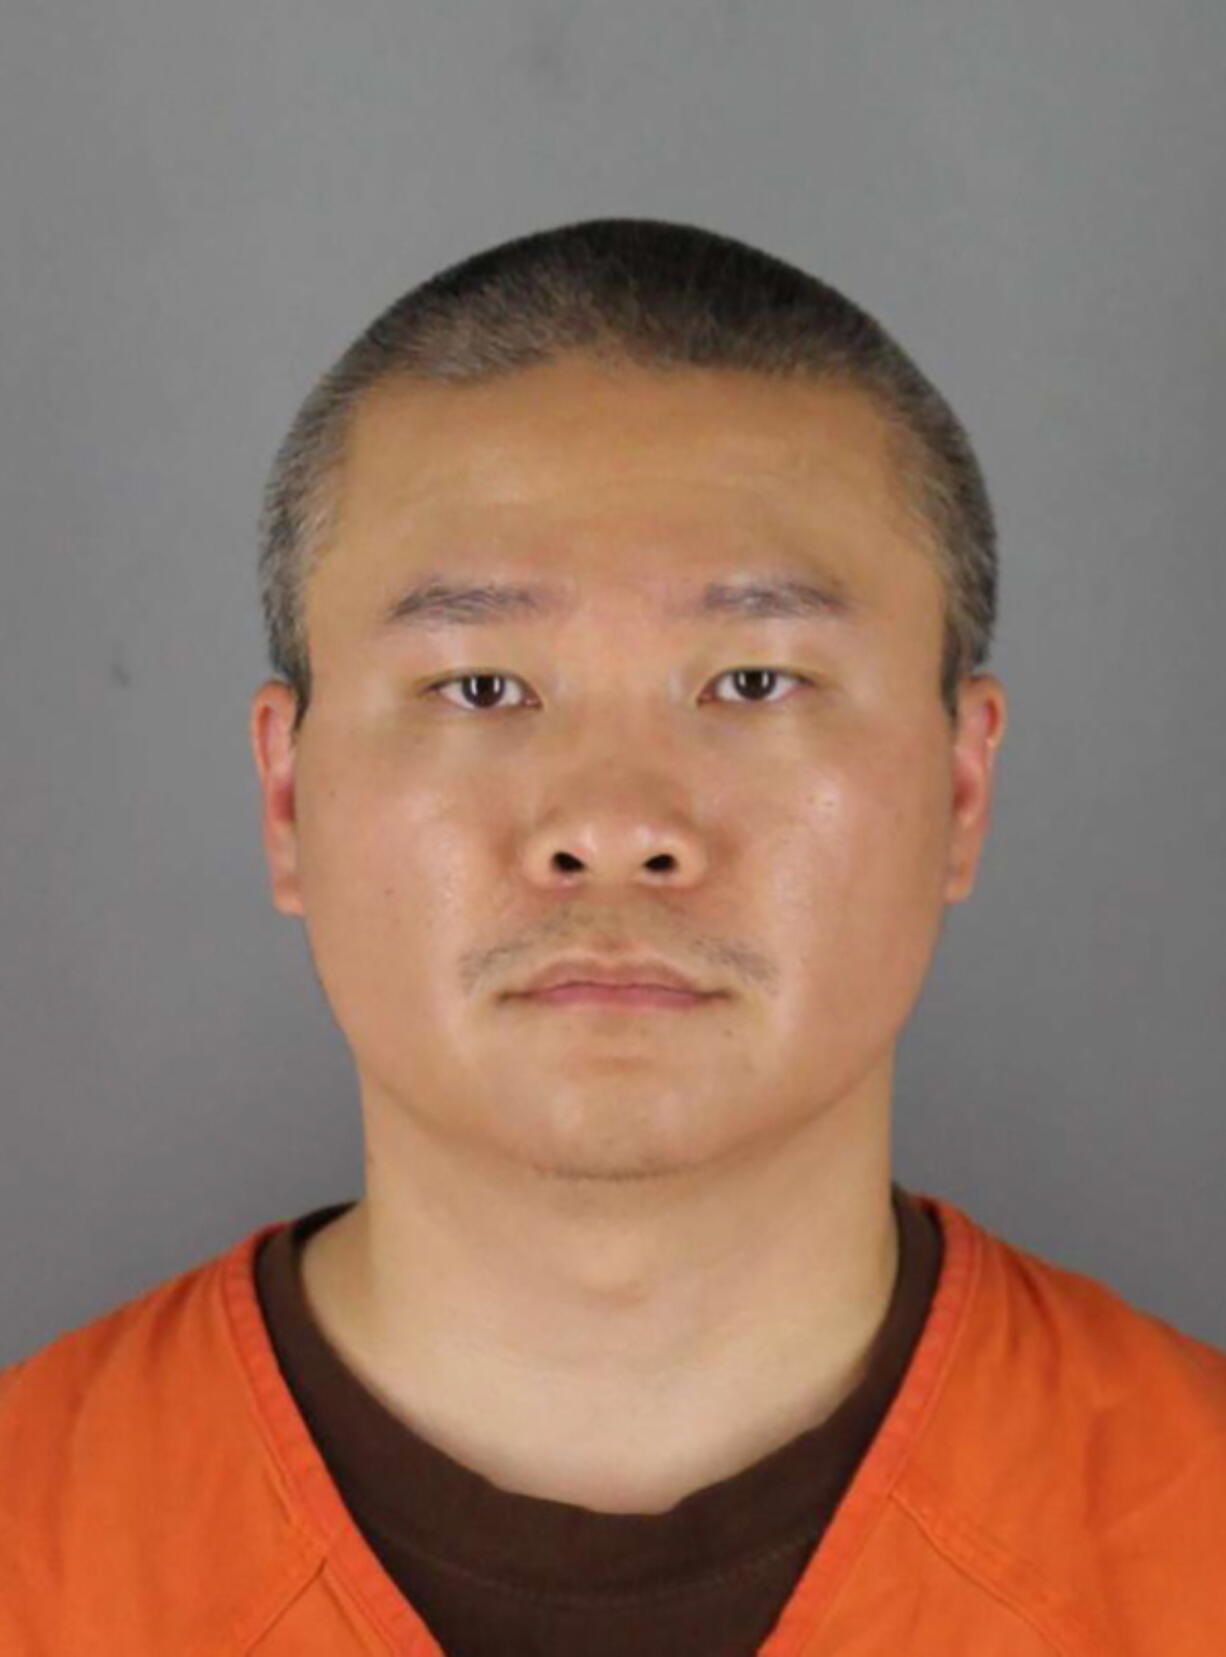 FILE - This photo provided by the Hennepin County Sheriff's Office in Minnesota on June 3, 2020, shows former Minneapolis Police Officer Tou Thao. U.S. District Judge Paul Magnuson handed J. Alexander Kueng and Thao a victory when he ruled that the complex formulas for calculating their sentences will use the crime of involuntary manslaughter, rather than murder, as a starting point. Magnuson will sentence the men in back-to-back hearings Wednesday, July 27, 2022, after they were convicted of violating George Floyd's civil rights when Officer Derek Chauvin pressed his knee into Floyd's neck for 9 1/2 minutes as the 46-year-old Black man was handcuffed and facedown on the street on May 25, 2020.